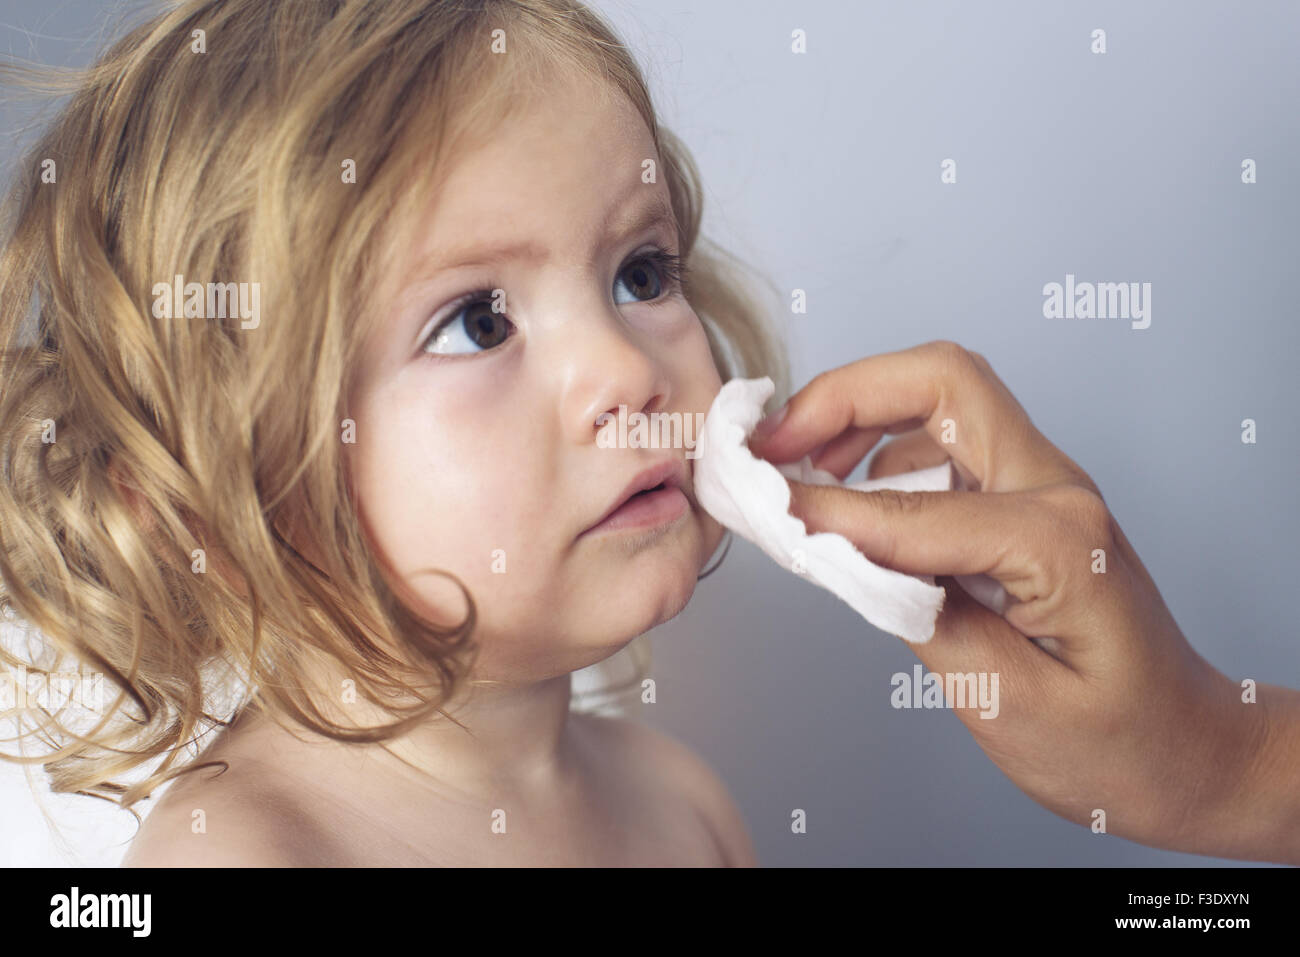 Parent wiping baby girl's face, cropped Stock Photo